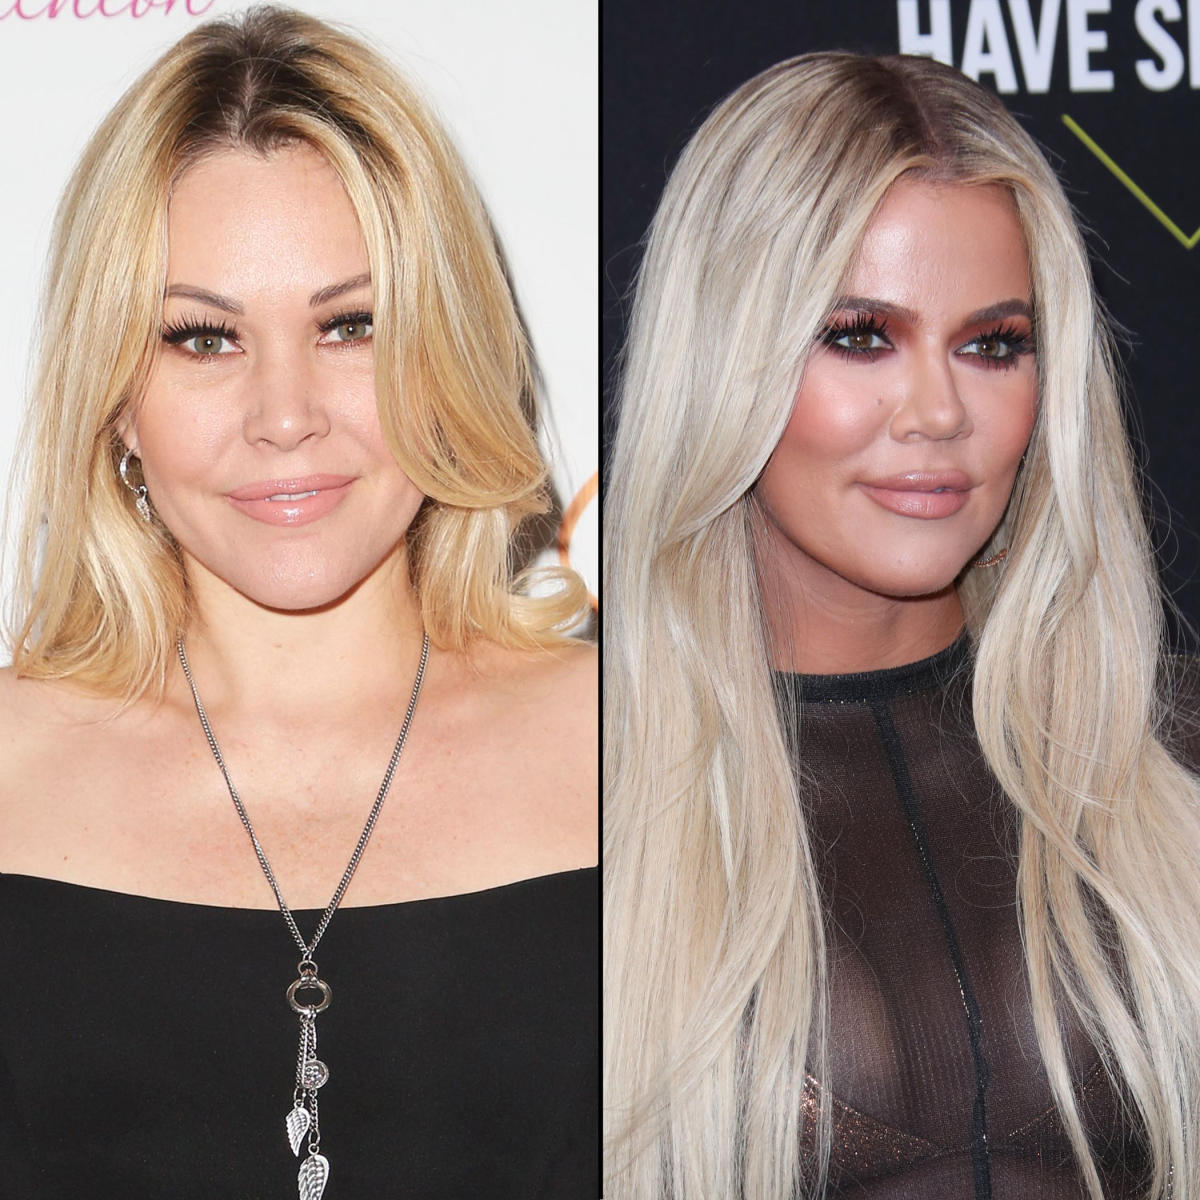 Shanna Moakler Shades Khloe Kardashian After Comparison ‘what Are You People Smoking 